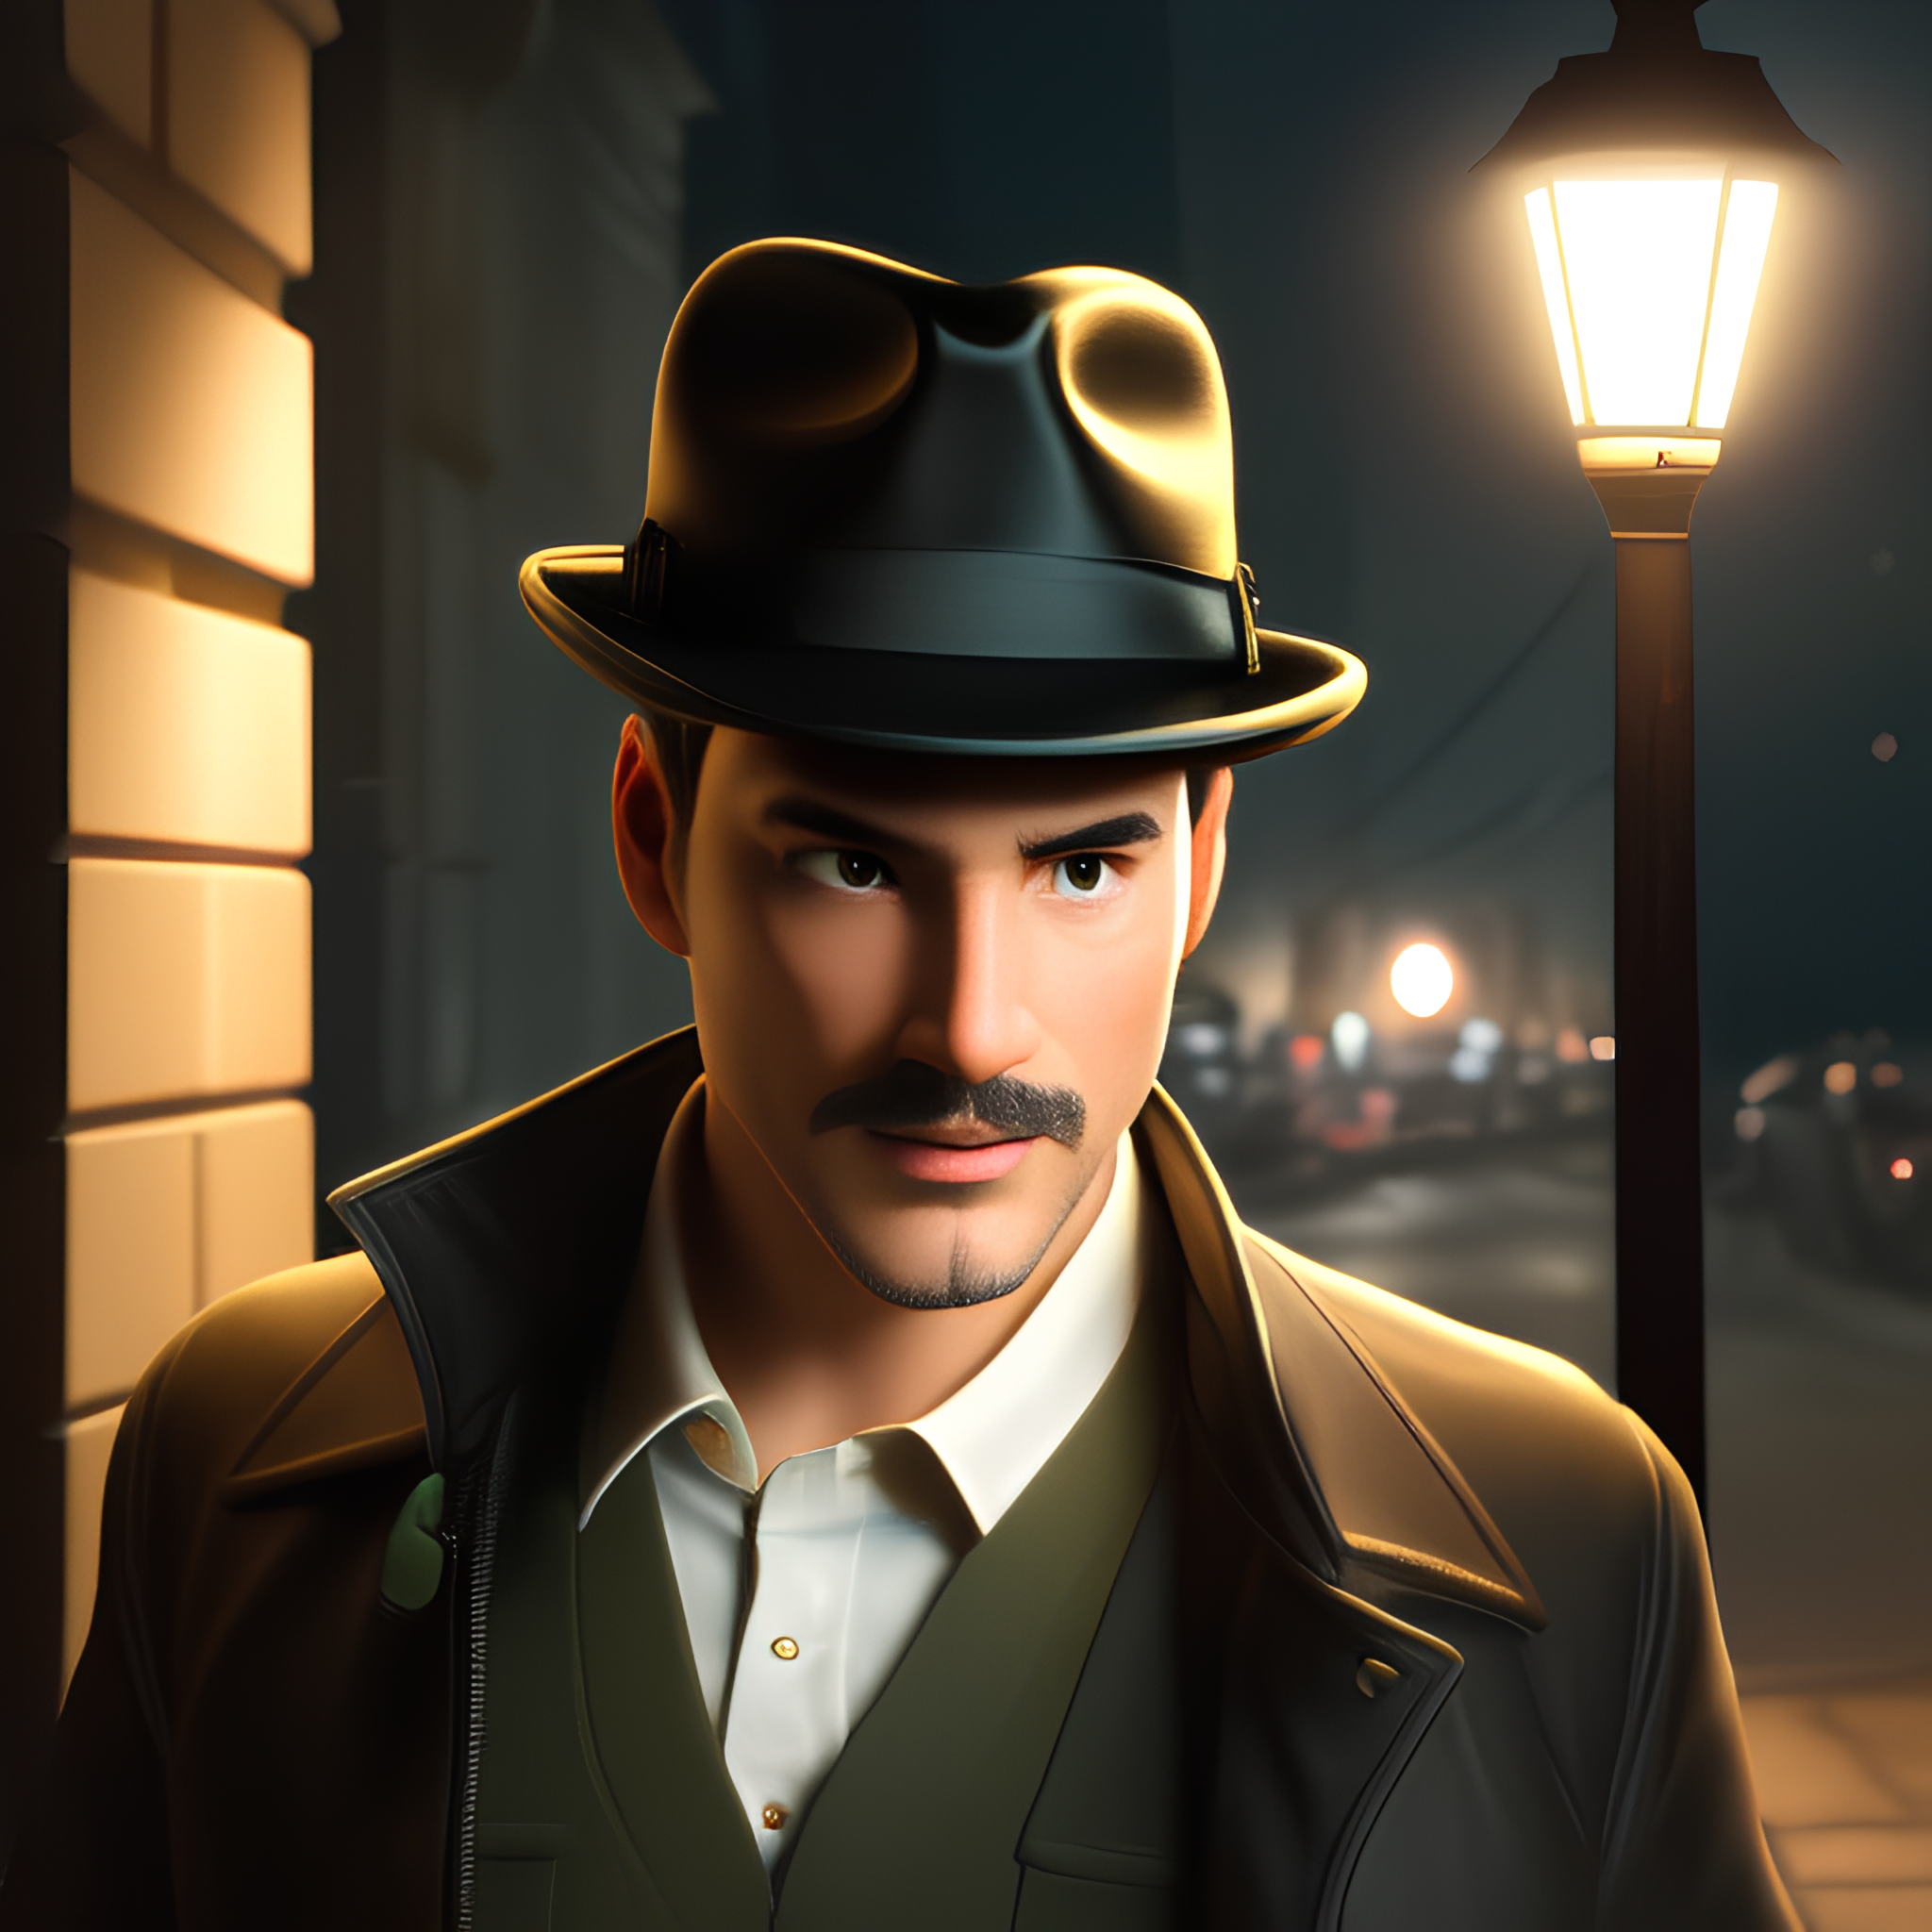 pltn-style---highly-detailed-and-realistic-profile-of-a-detective-with-a-cigarette-in-his-hand...png